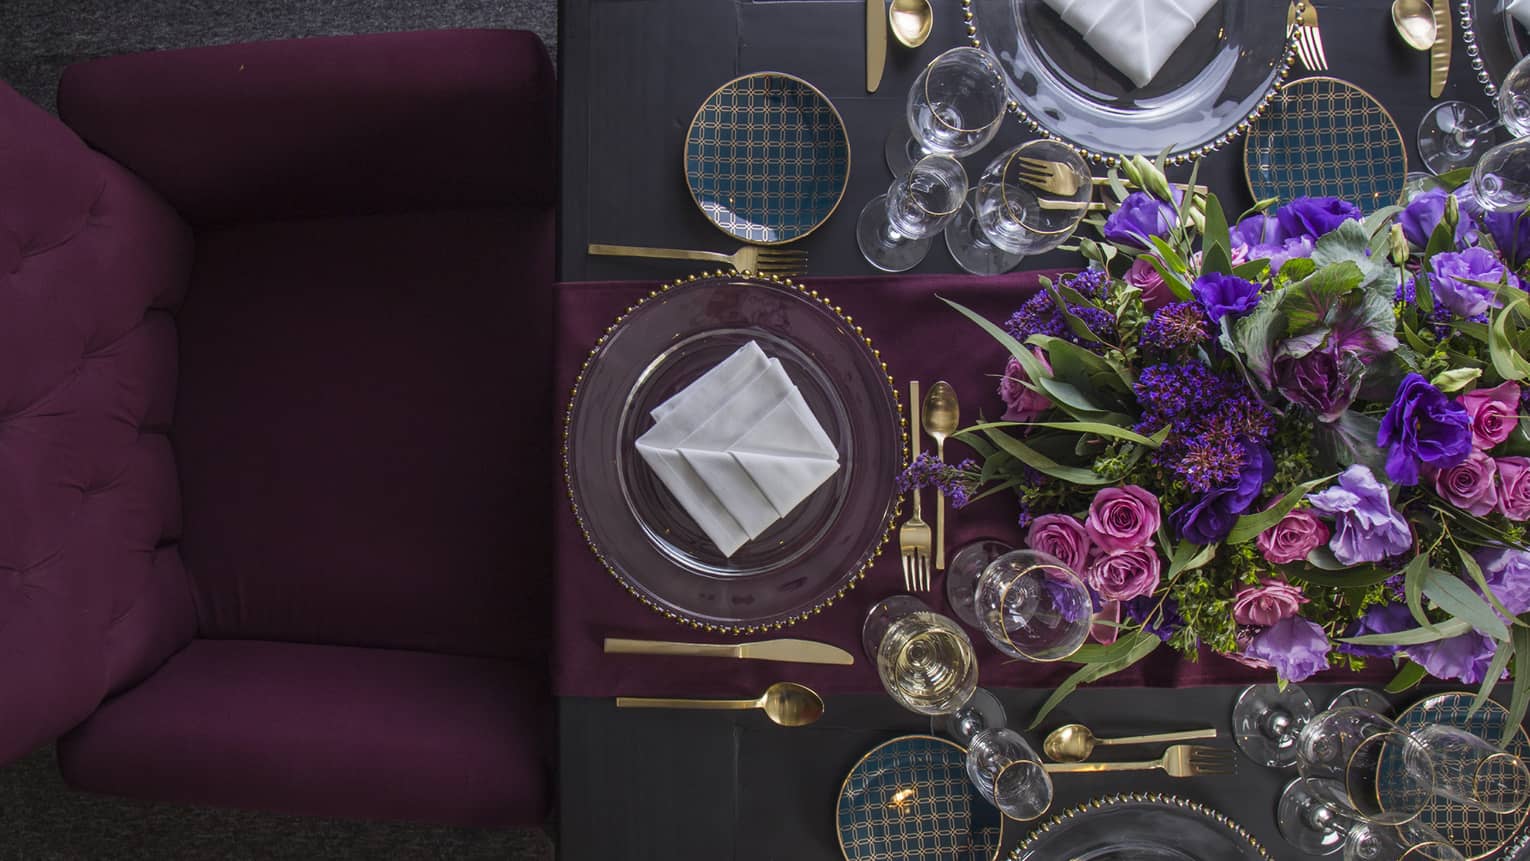 Aerial view of dining table with deep purple chair, table runner, flower arrangement